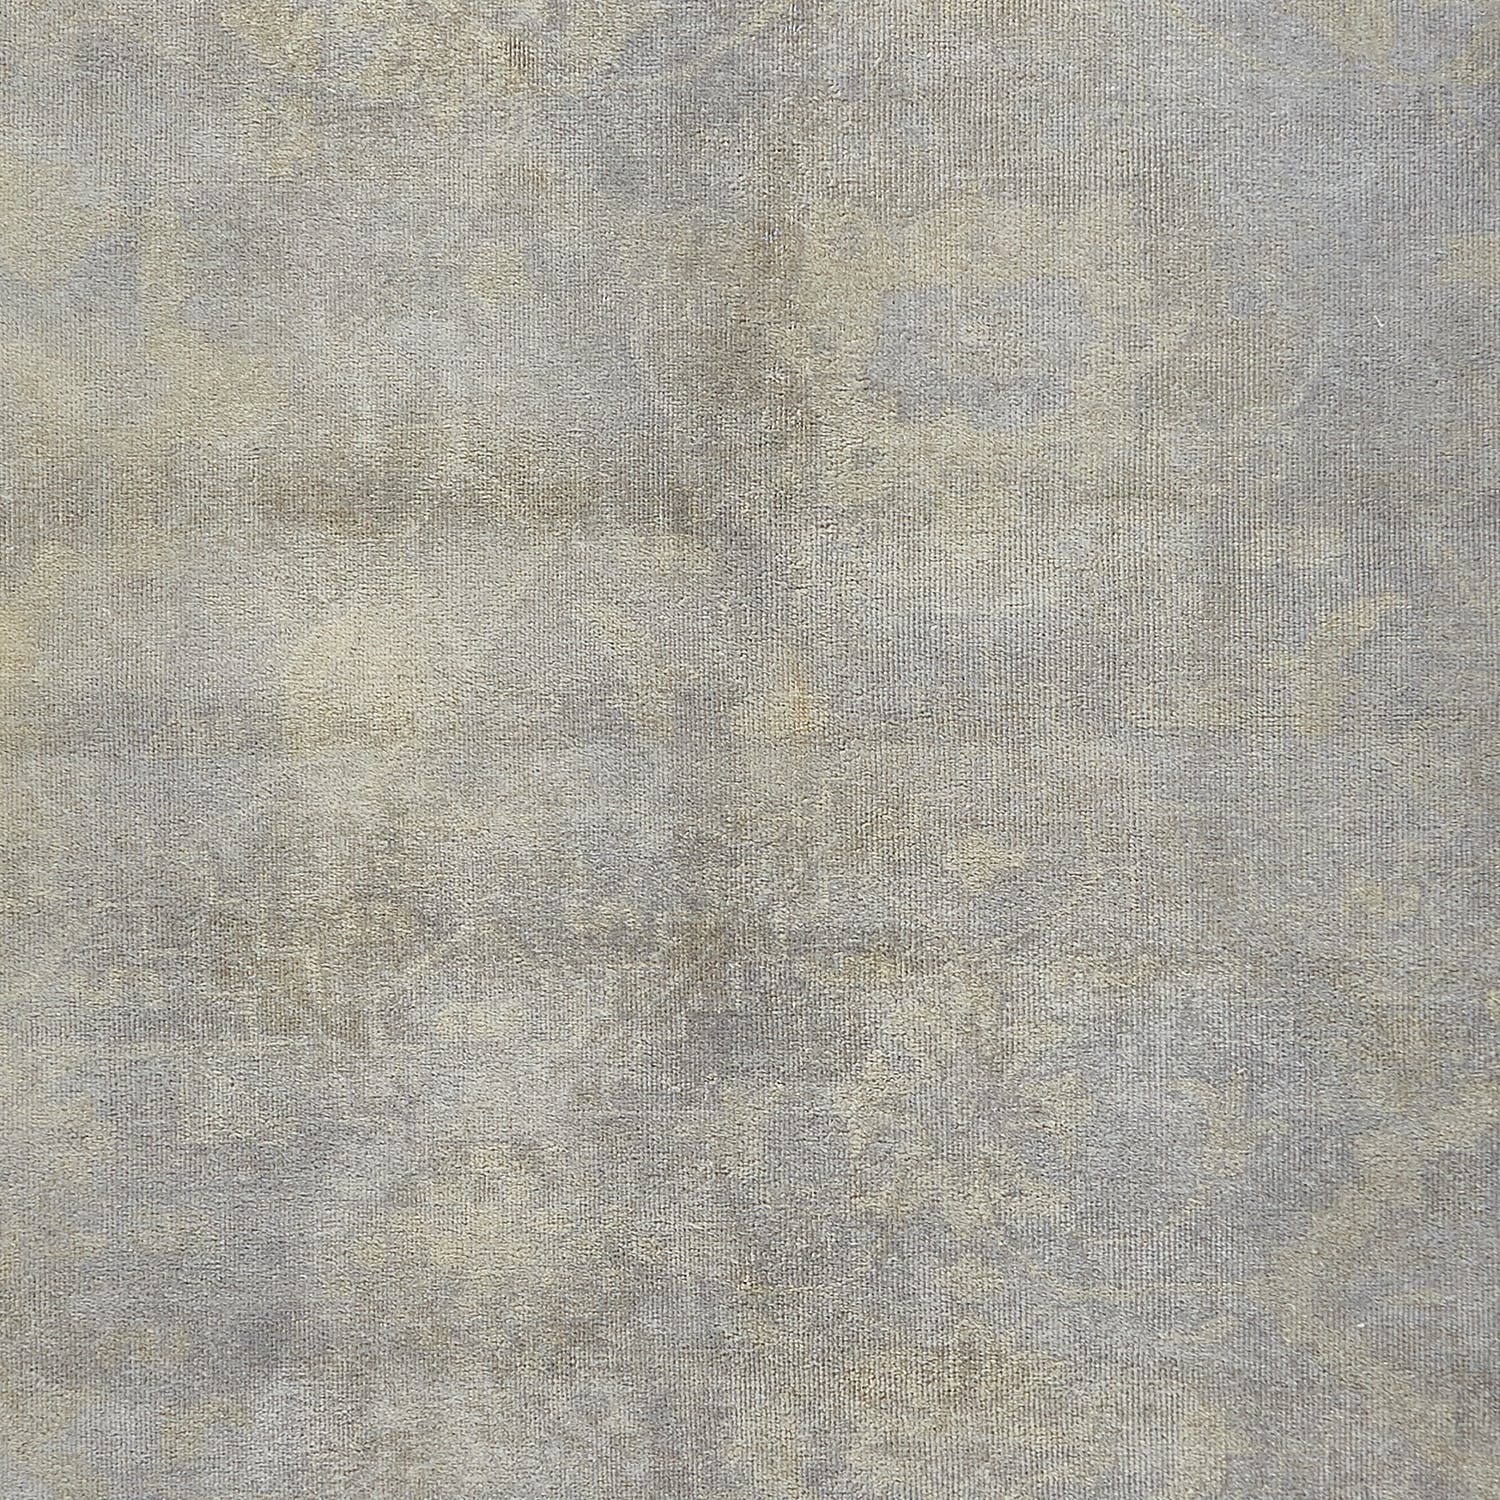 Abstract textured surface with neutral colors resembling aged weathered material.